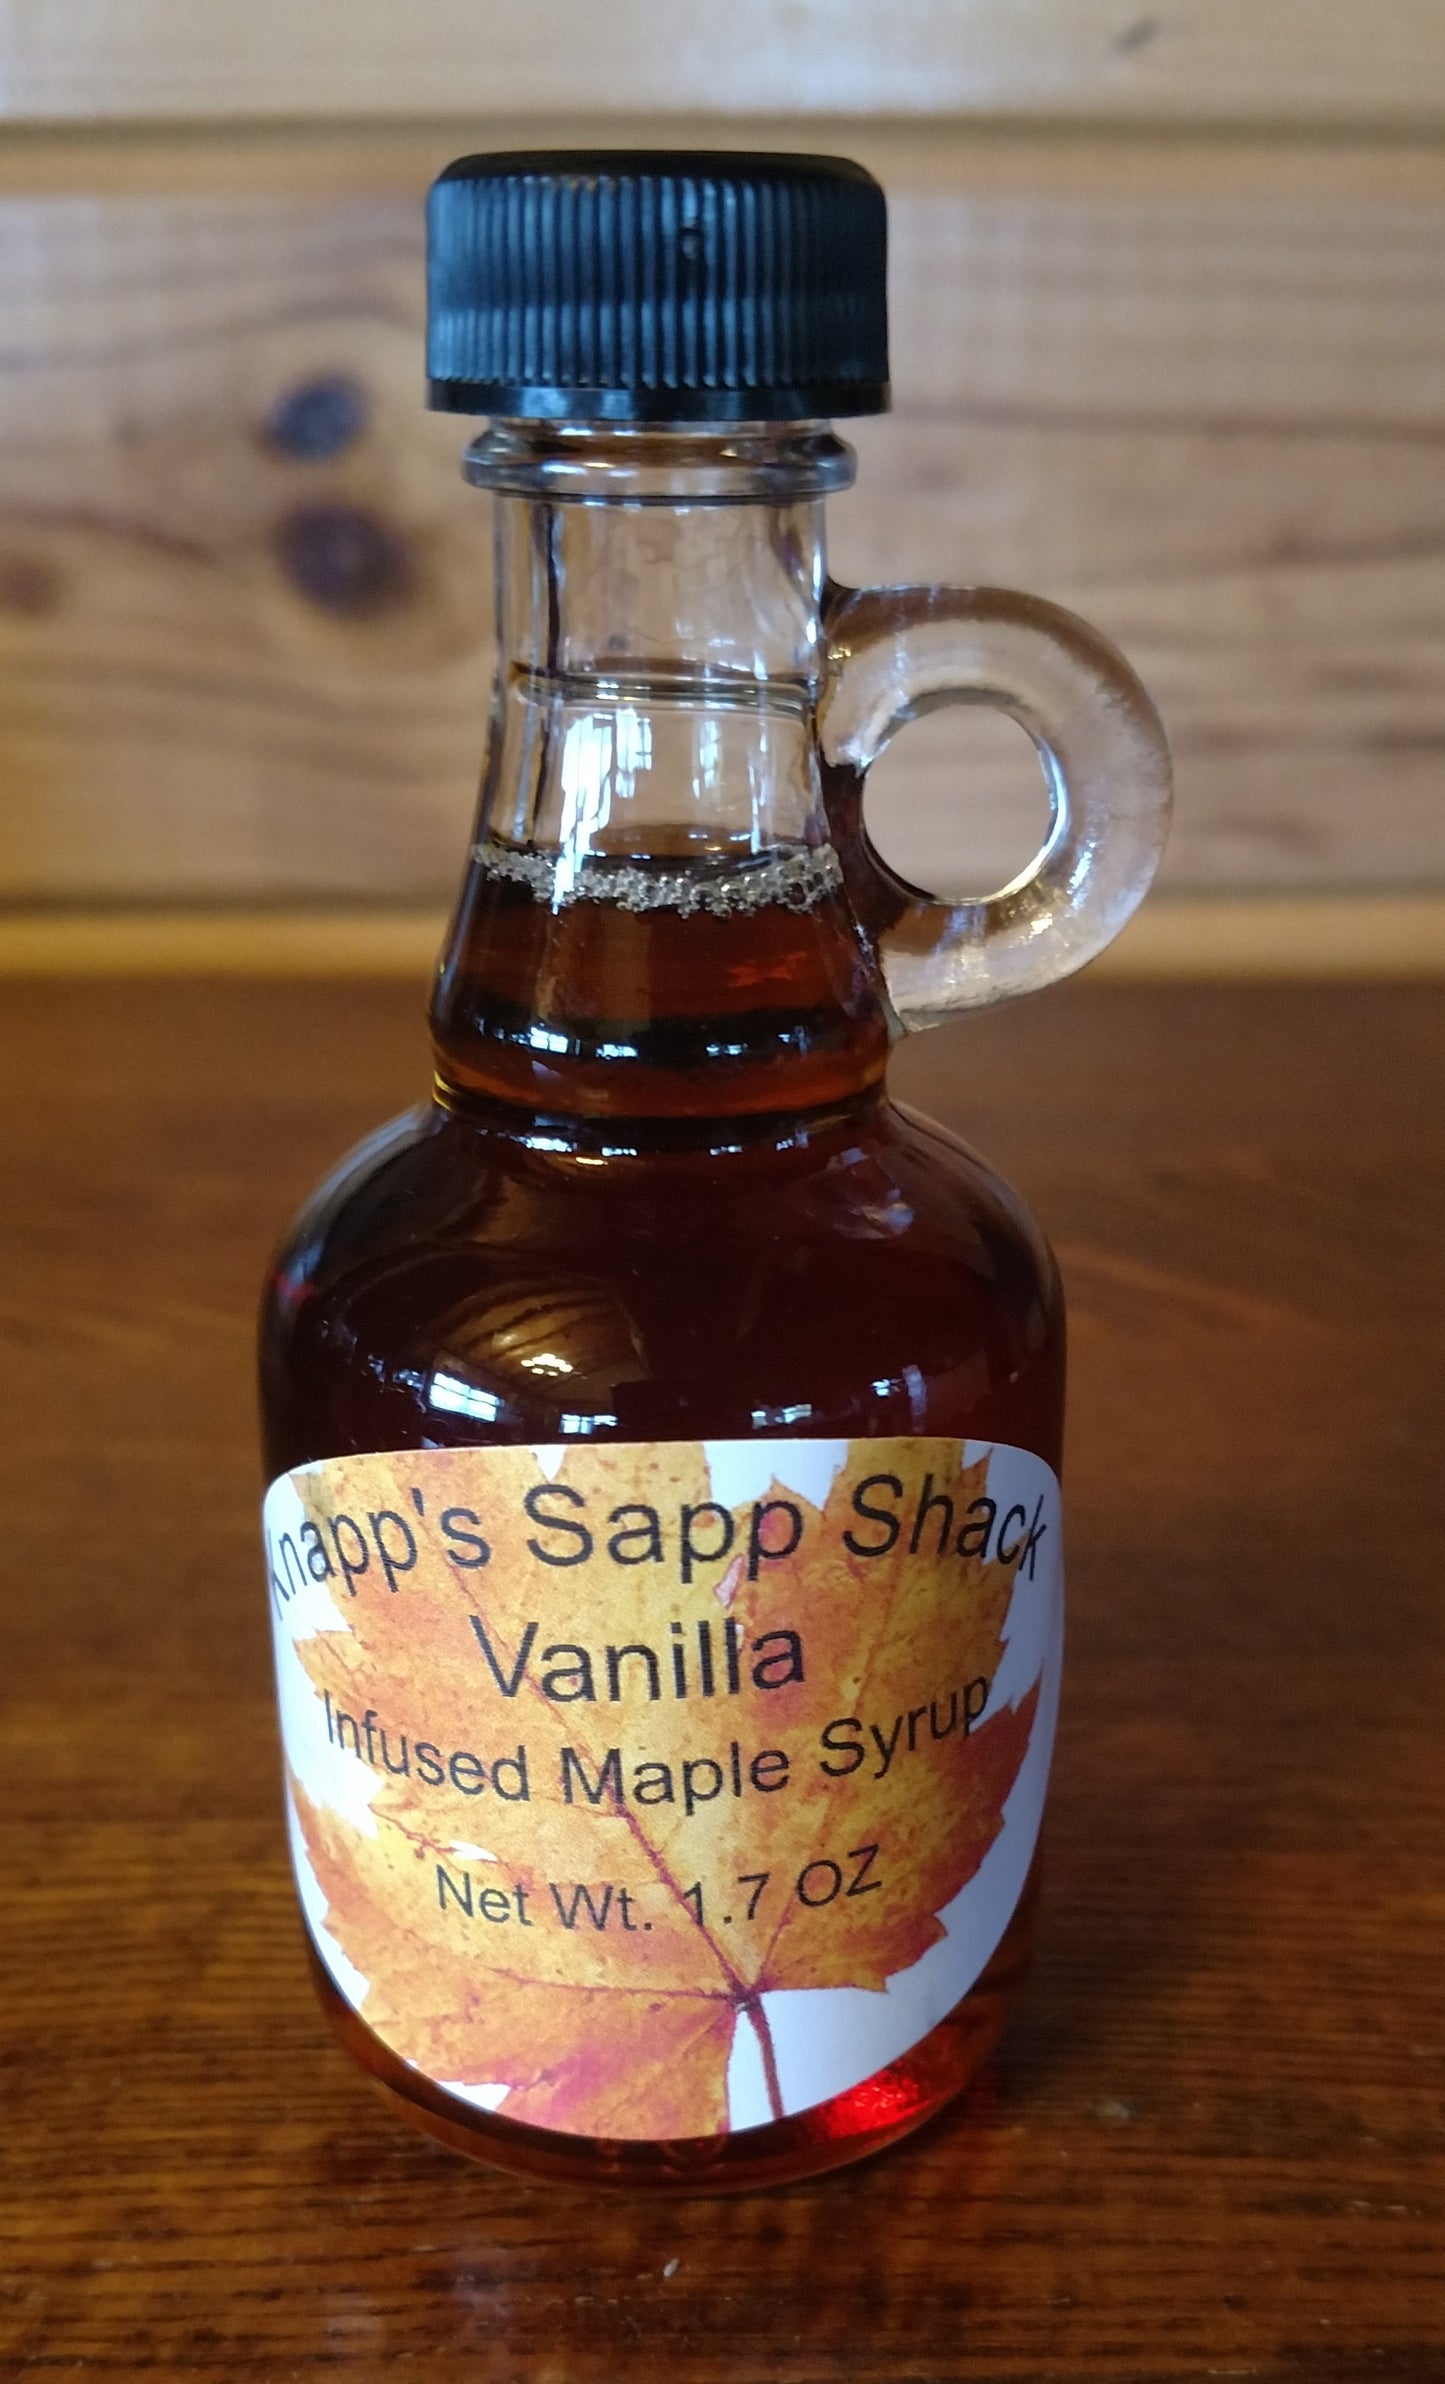 50 ML (1.7OZ) Infused Syrups